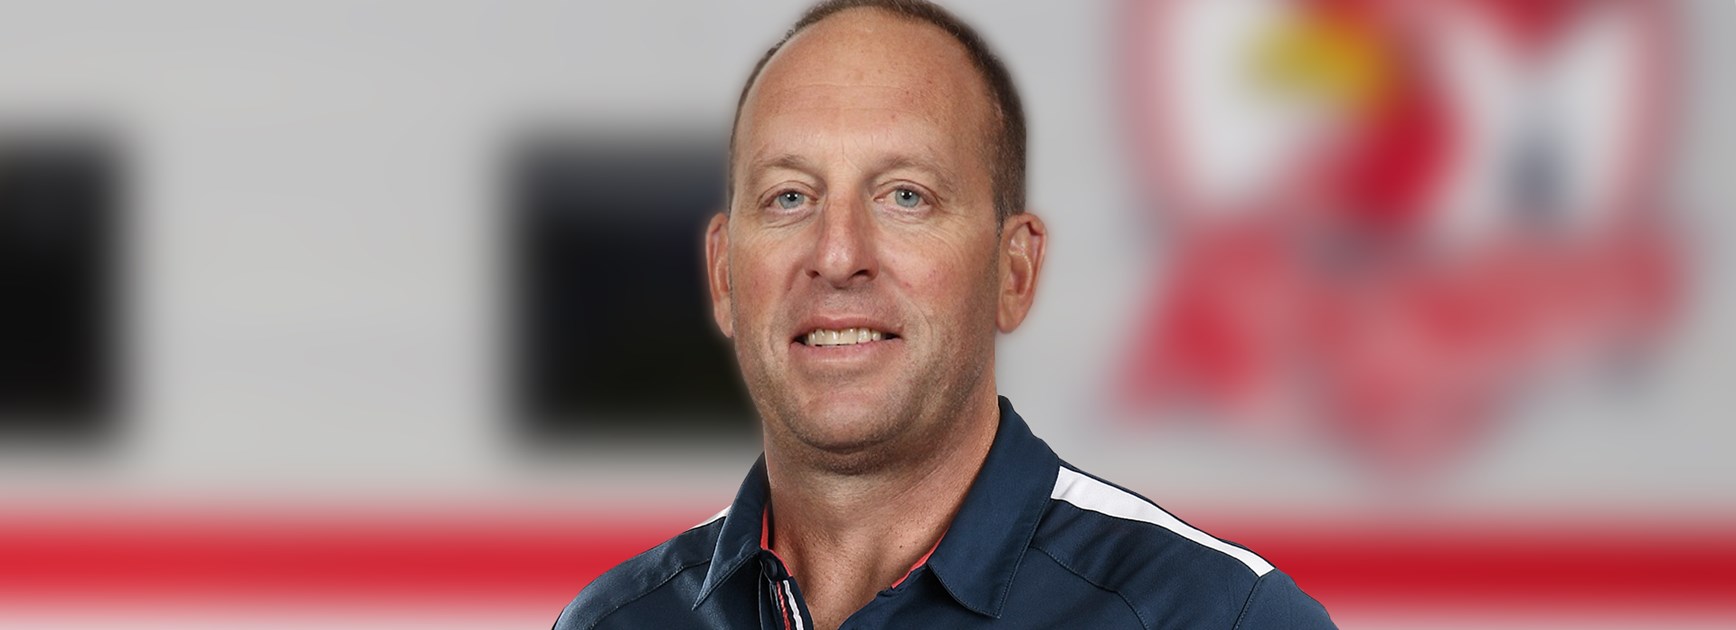 Sydney Roosters Appoint David Misson as Head of Performance